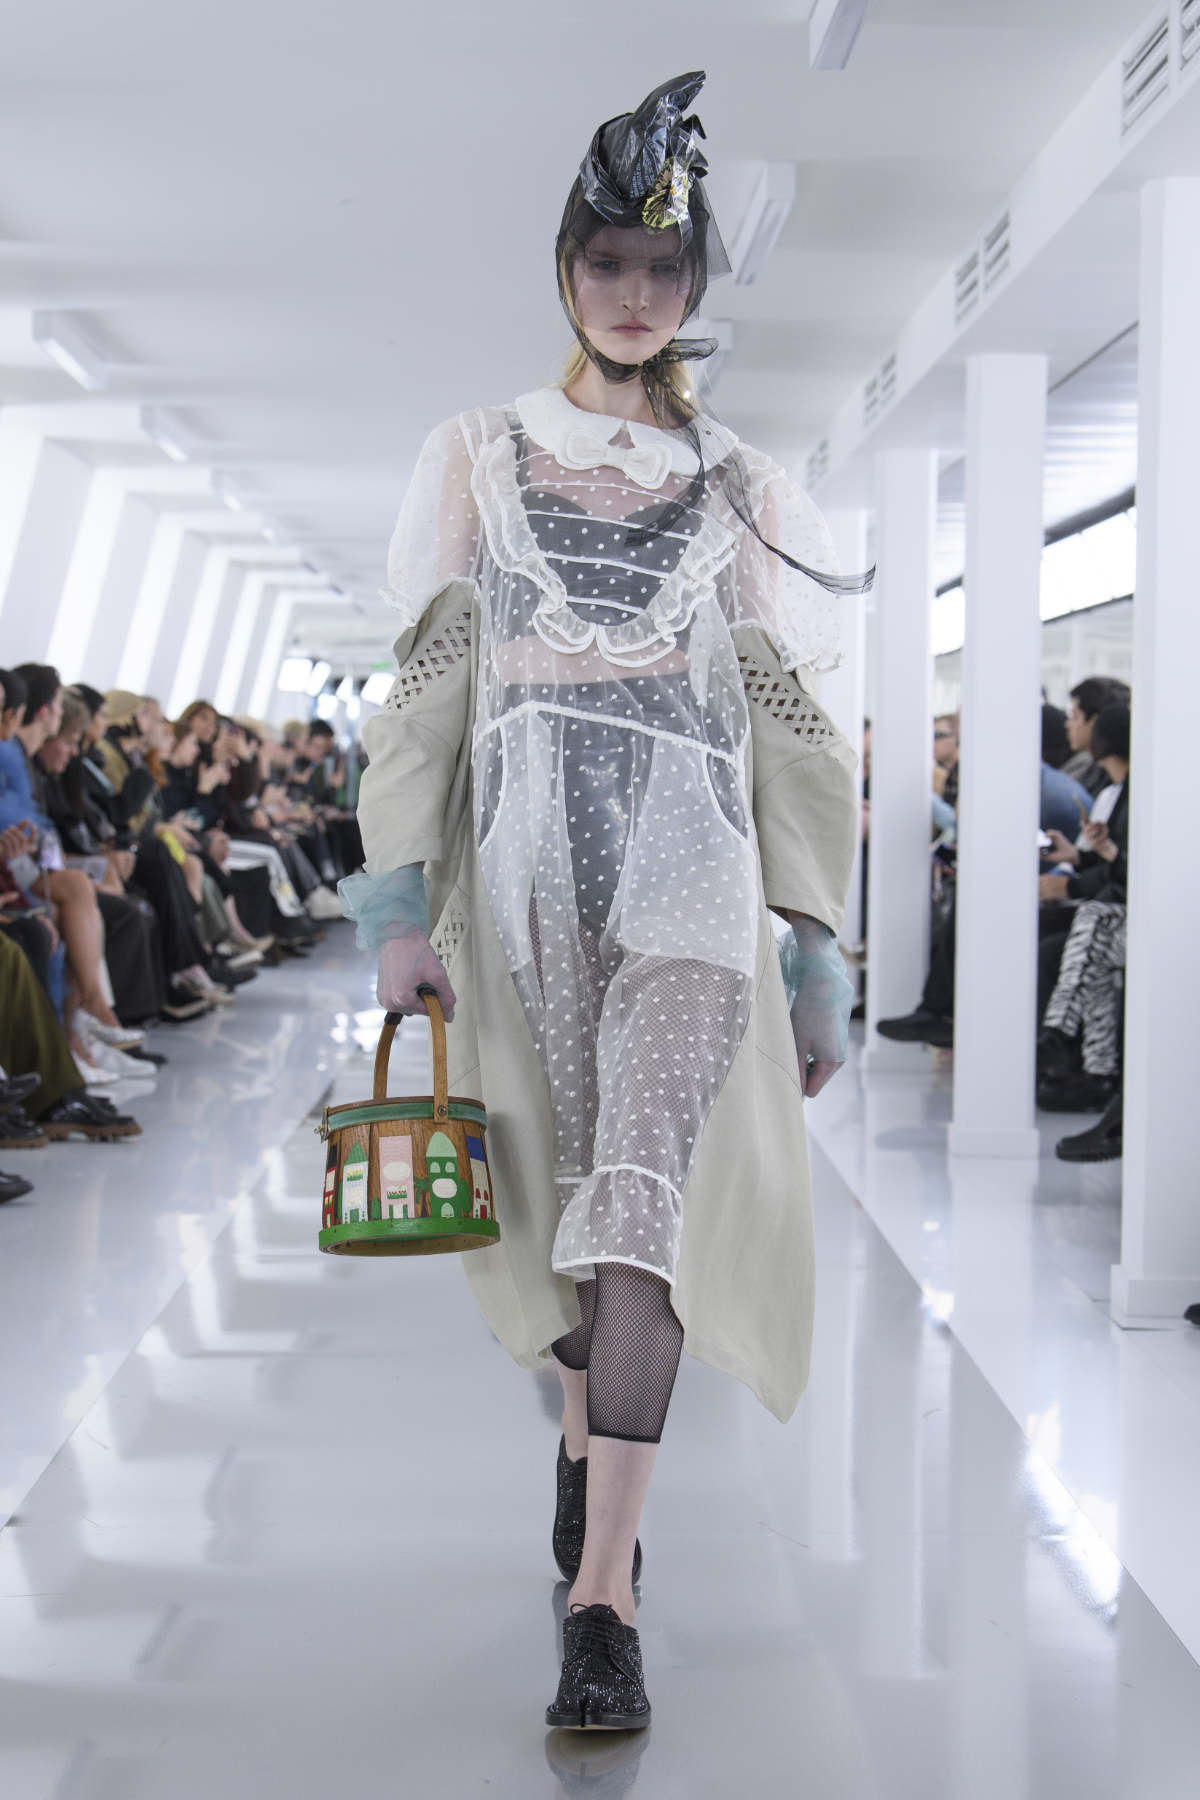 Maison Margiela Presents Its New 2023 Co-Ed Collection